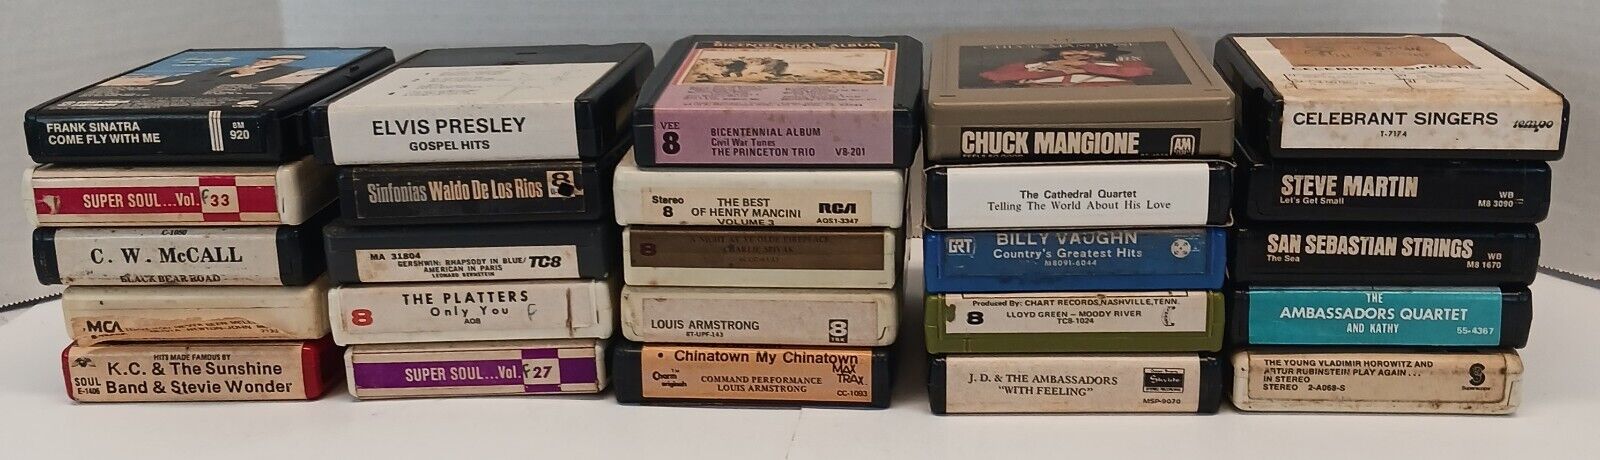 Mixed Lot of 25 Vintage 8 Track Tapes 1970s Sinatra Elvis Louis Armstrong McCall